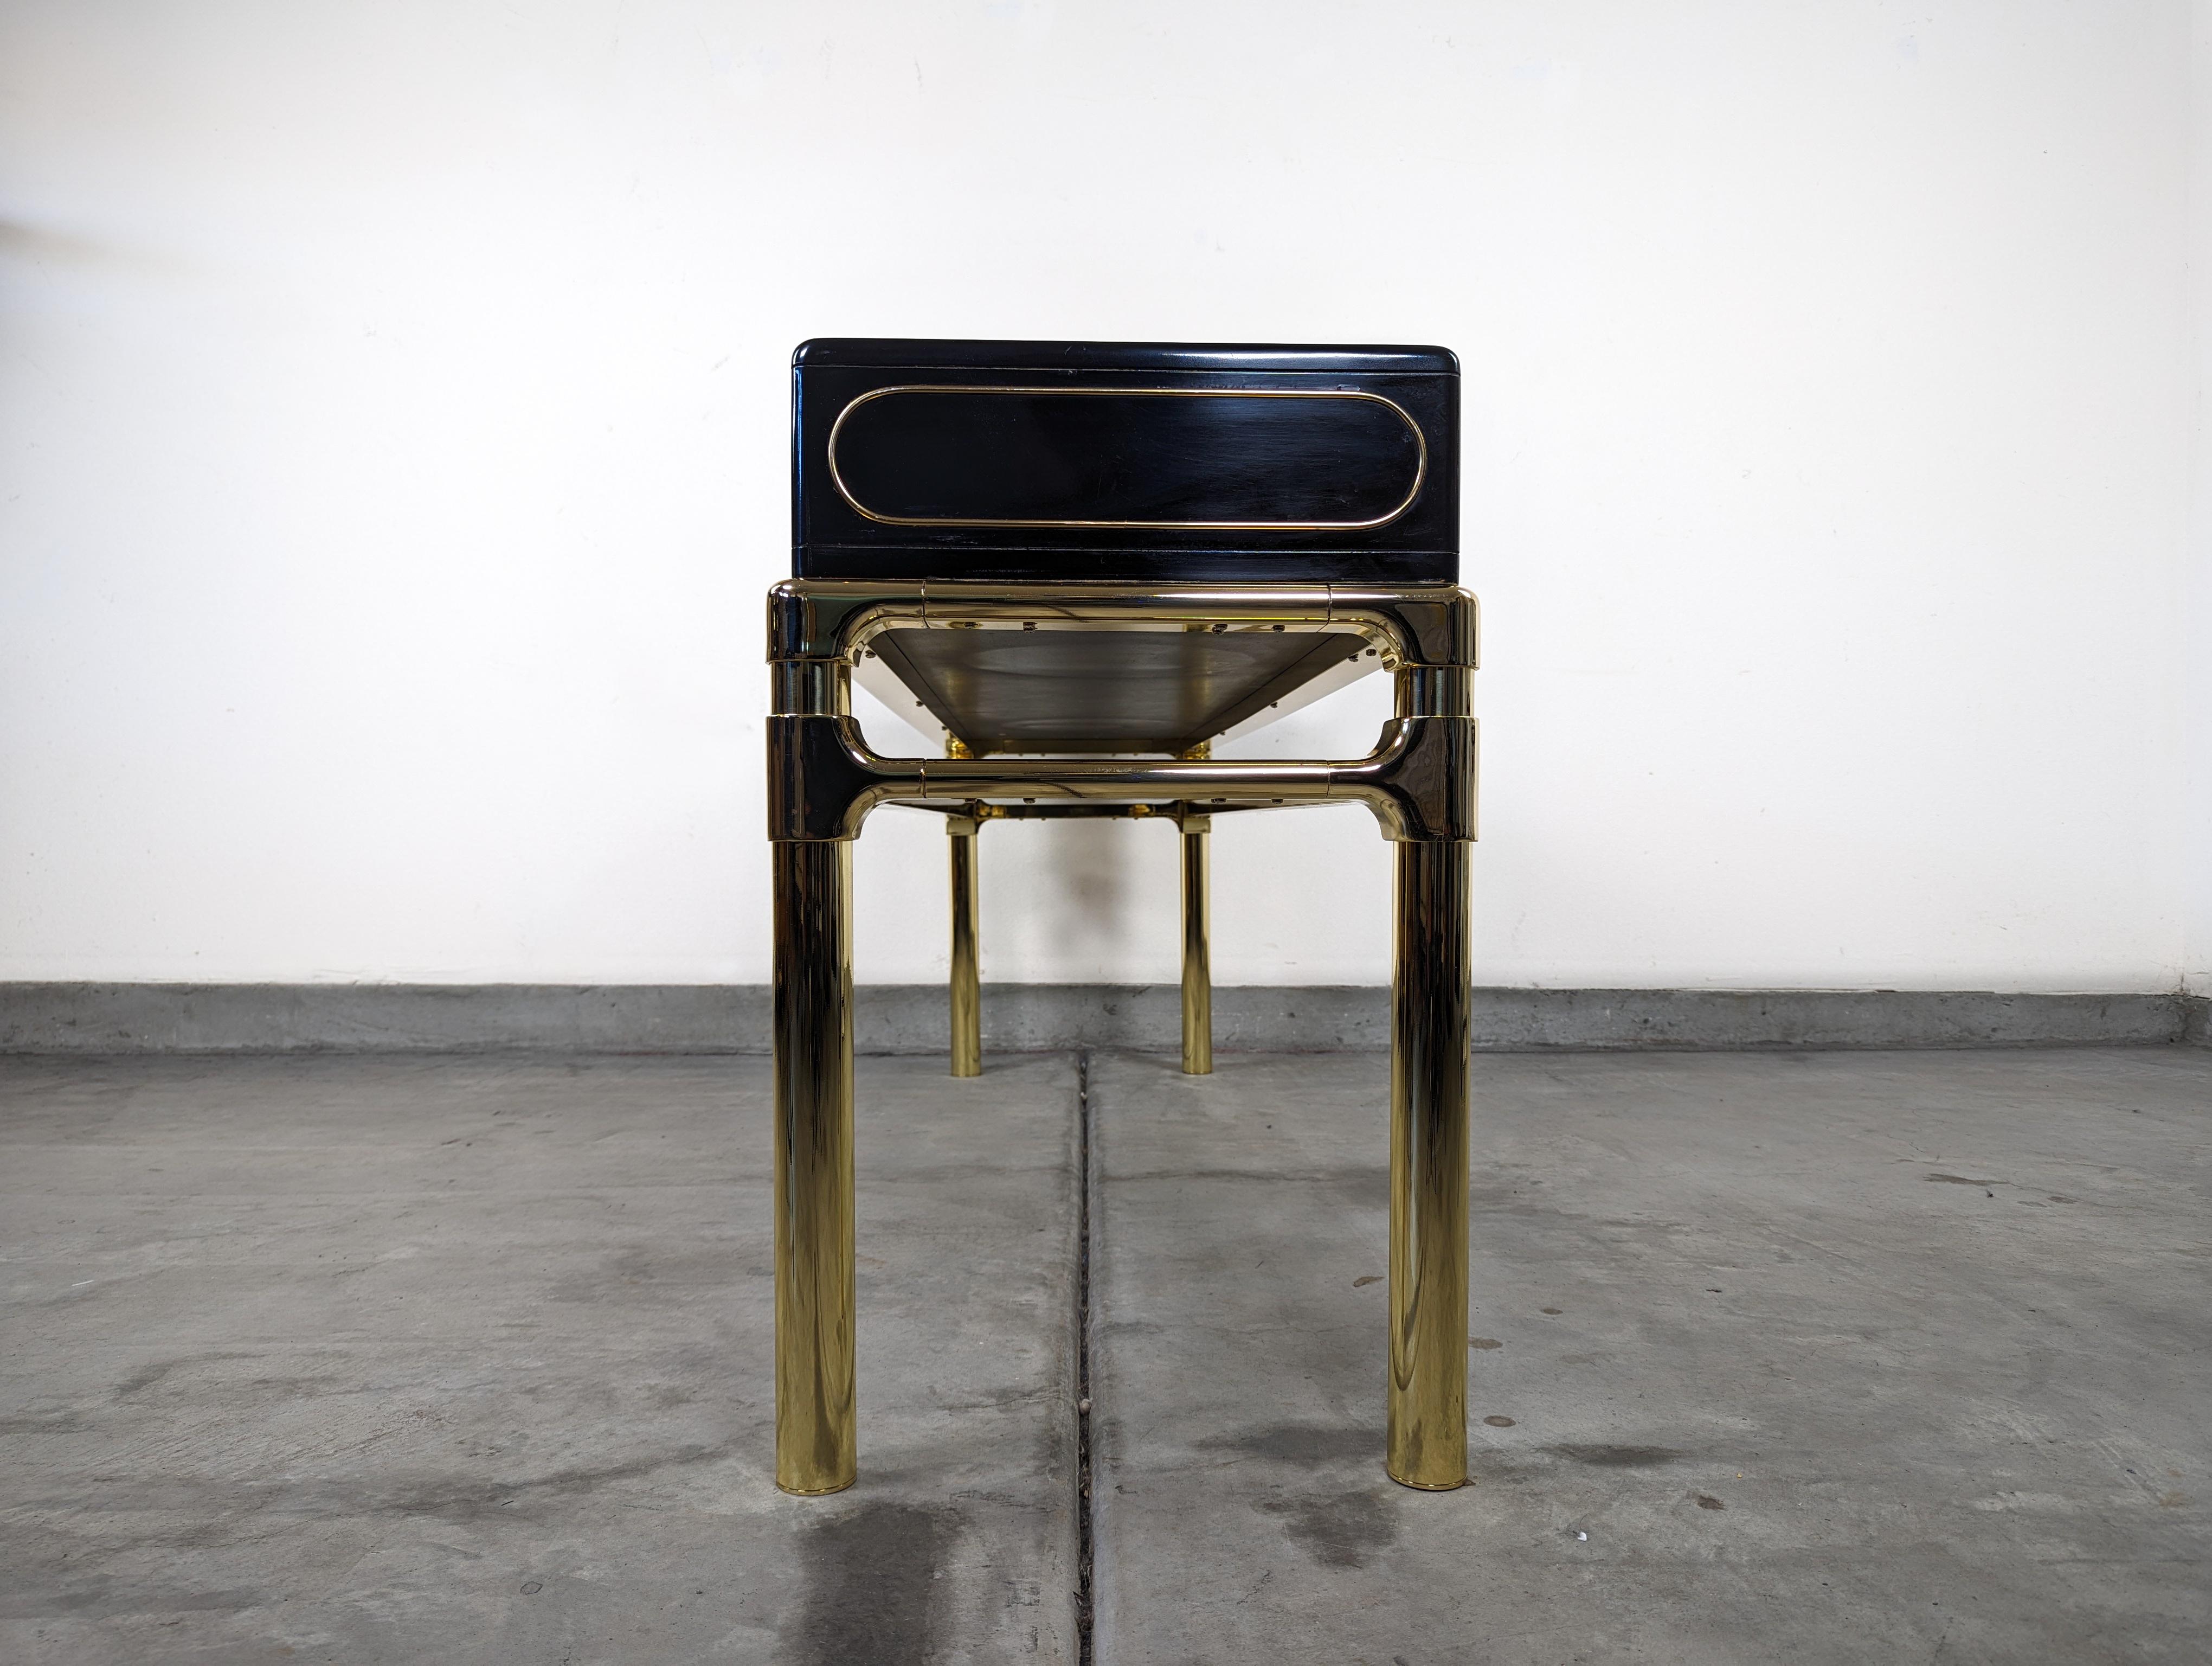 Polished Brass and Black Lacquer Console Table With Drawers by Mastercraft, c1970s For Sale